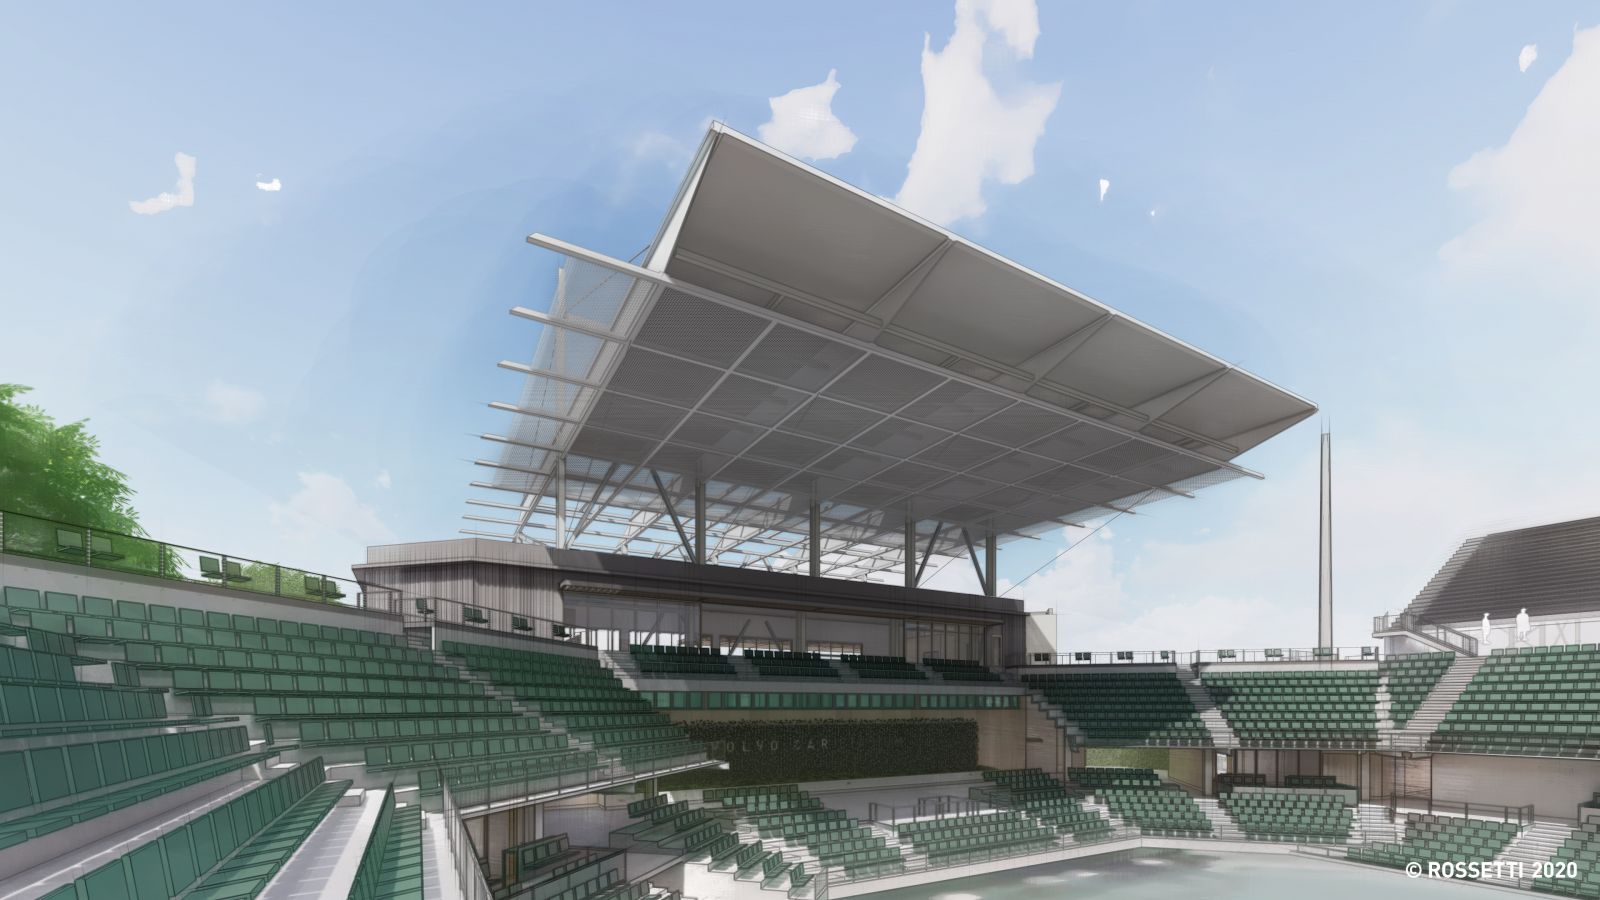 Architectural renderings show plans to renovate Volvo Car Stadium and include a permanent canopy that will offer covering for tennis tournament and event spectators surrounding the facility. (Rendering/Charleston Tennis LLC)